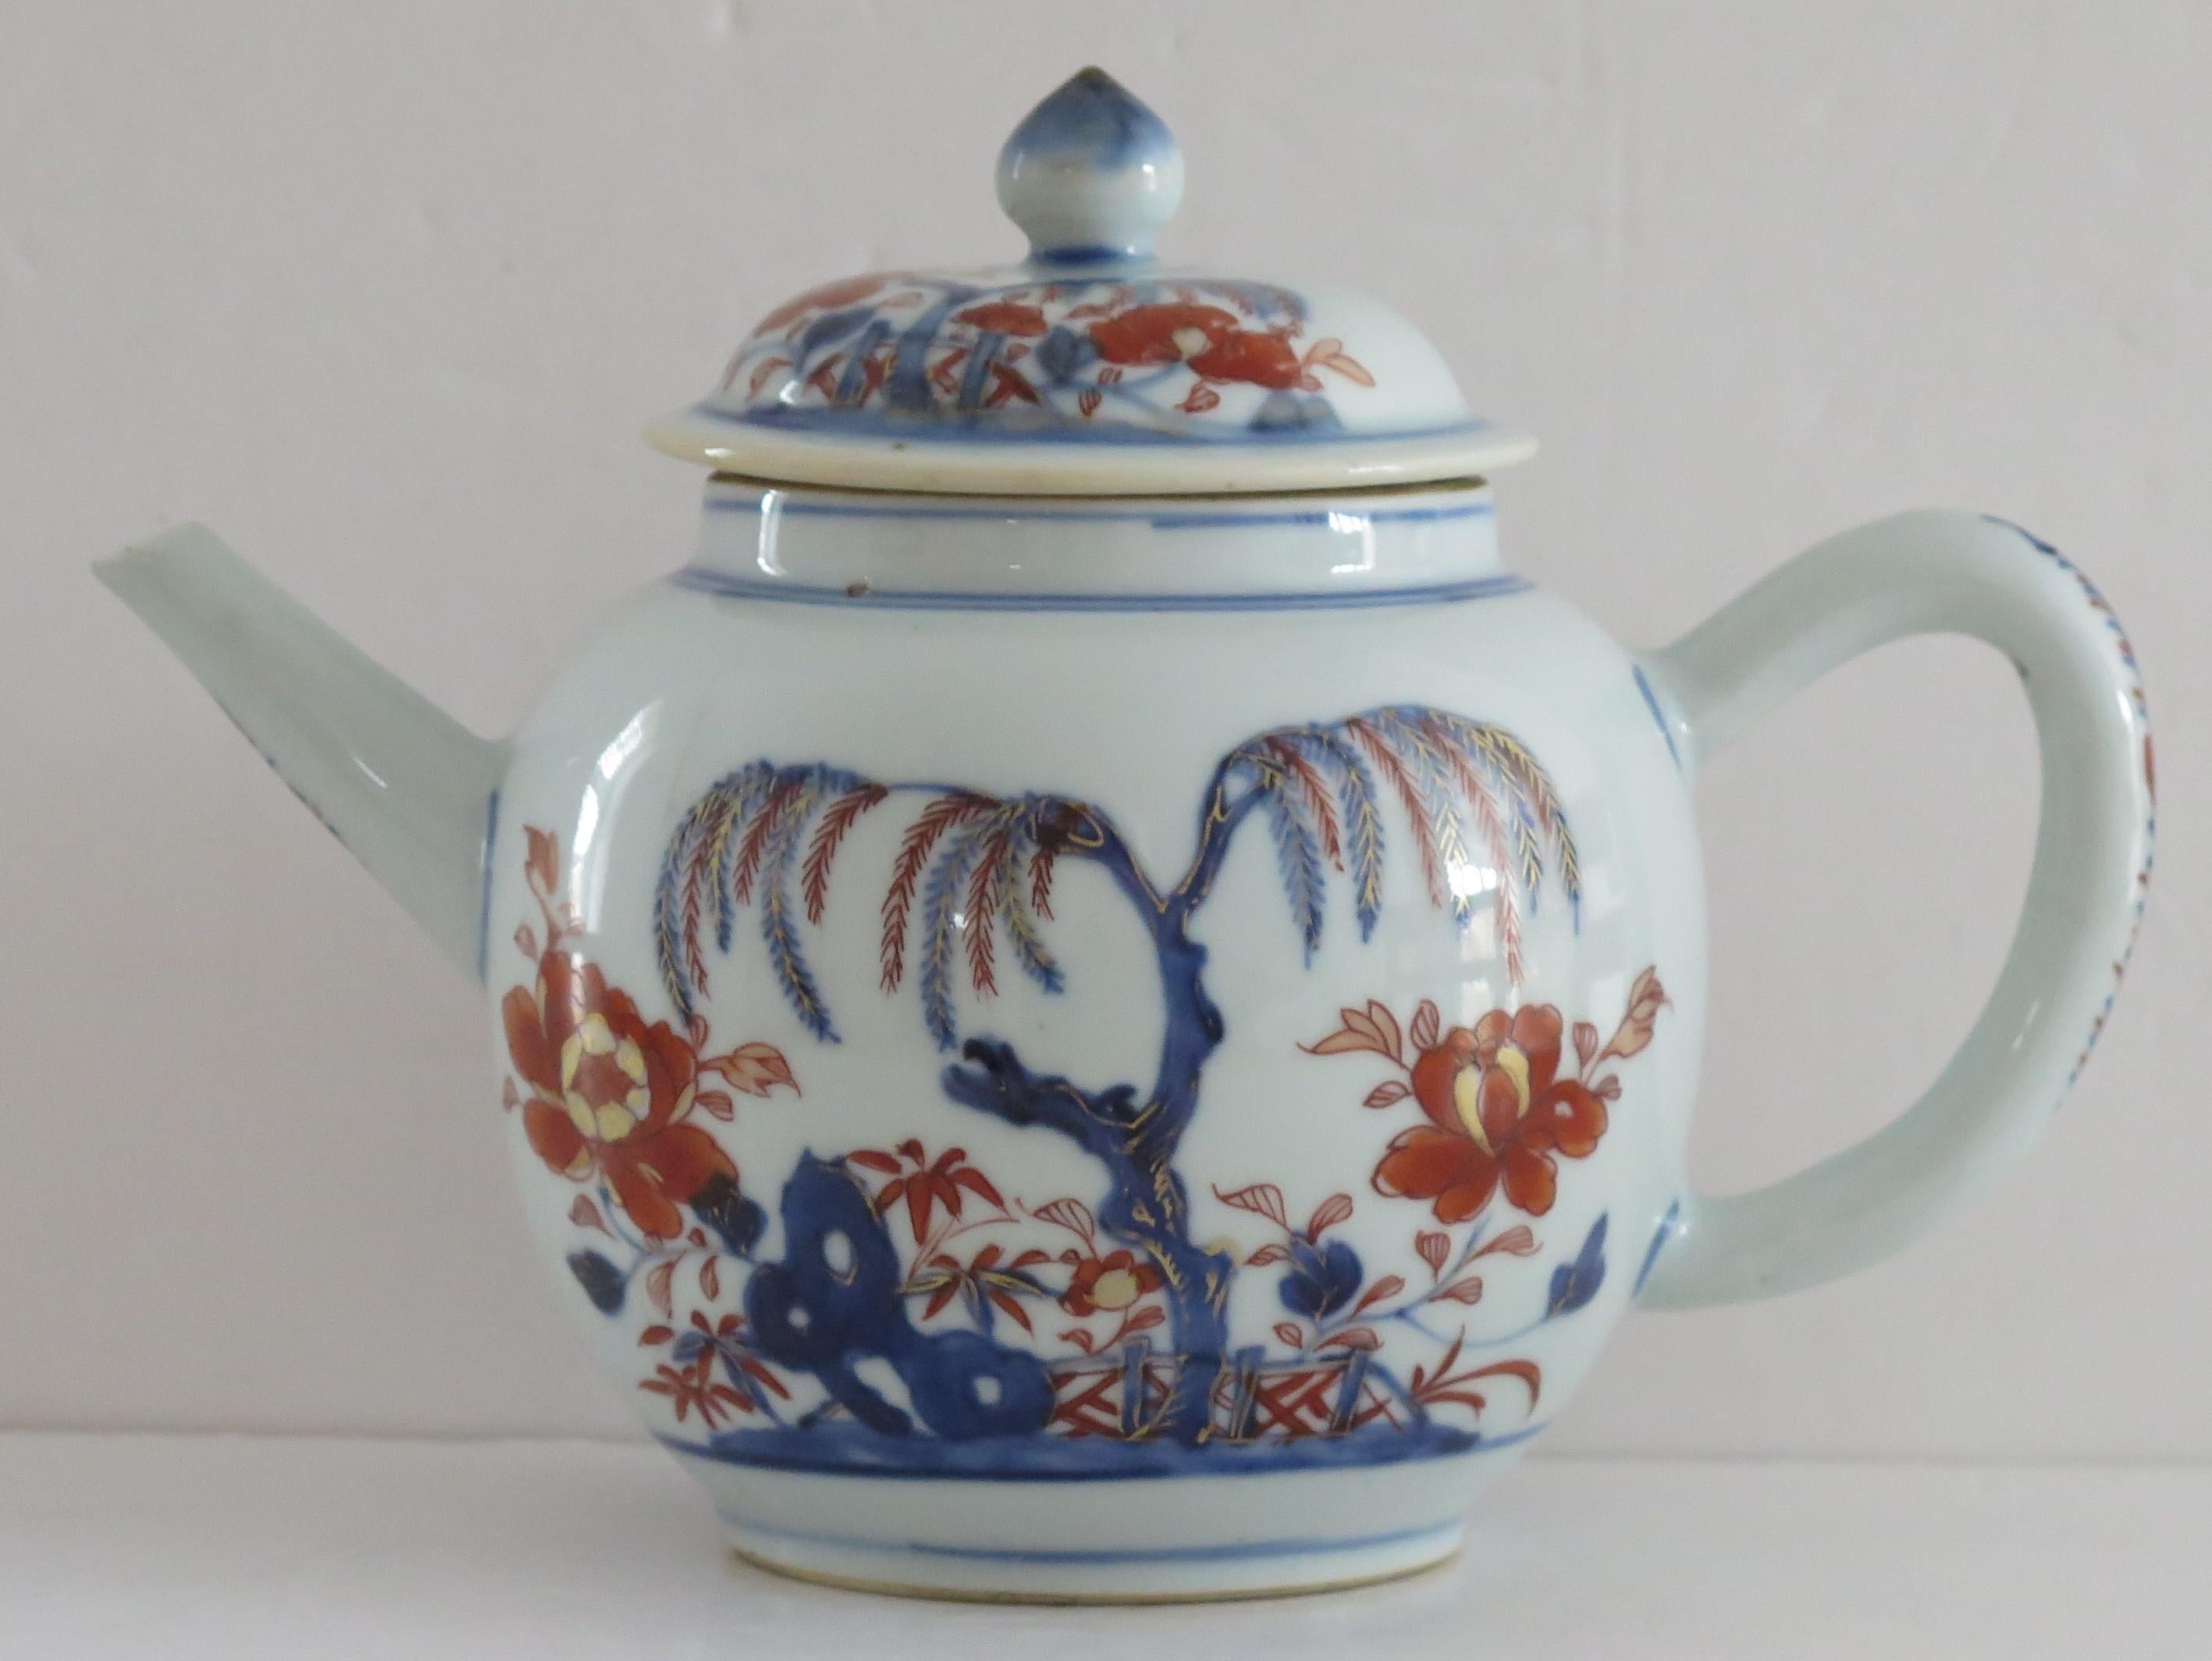 This is a very good early Chinese Teapot and matching cover from the Qing Dynasty, Kangxi period ( 1662 to 1722) which we date to Circa 1710.

The teapot has a globular form on a short foot-rim, with a curved 